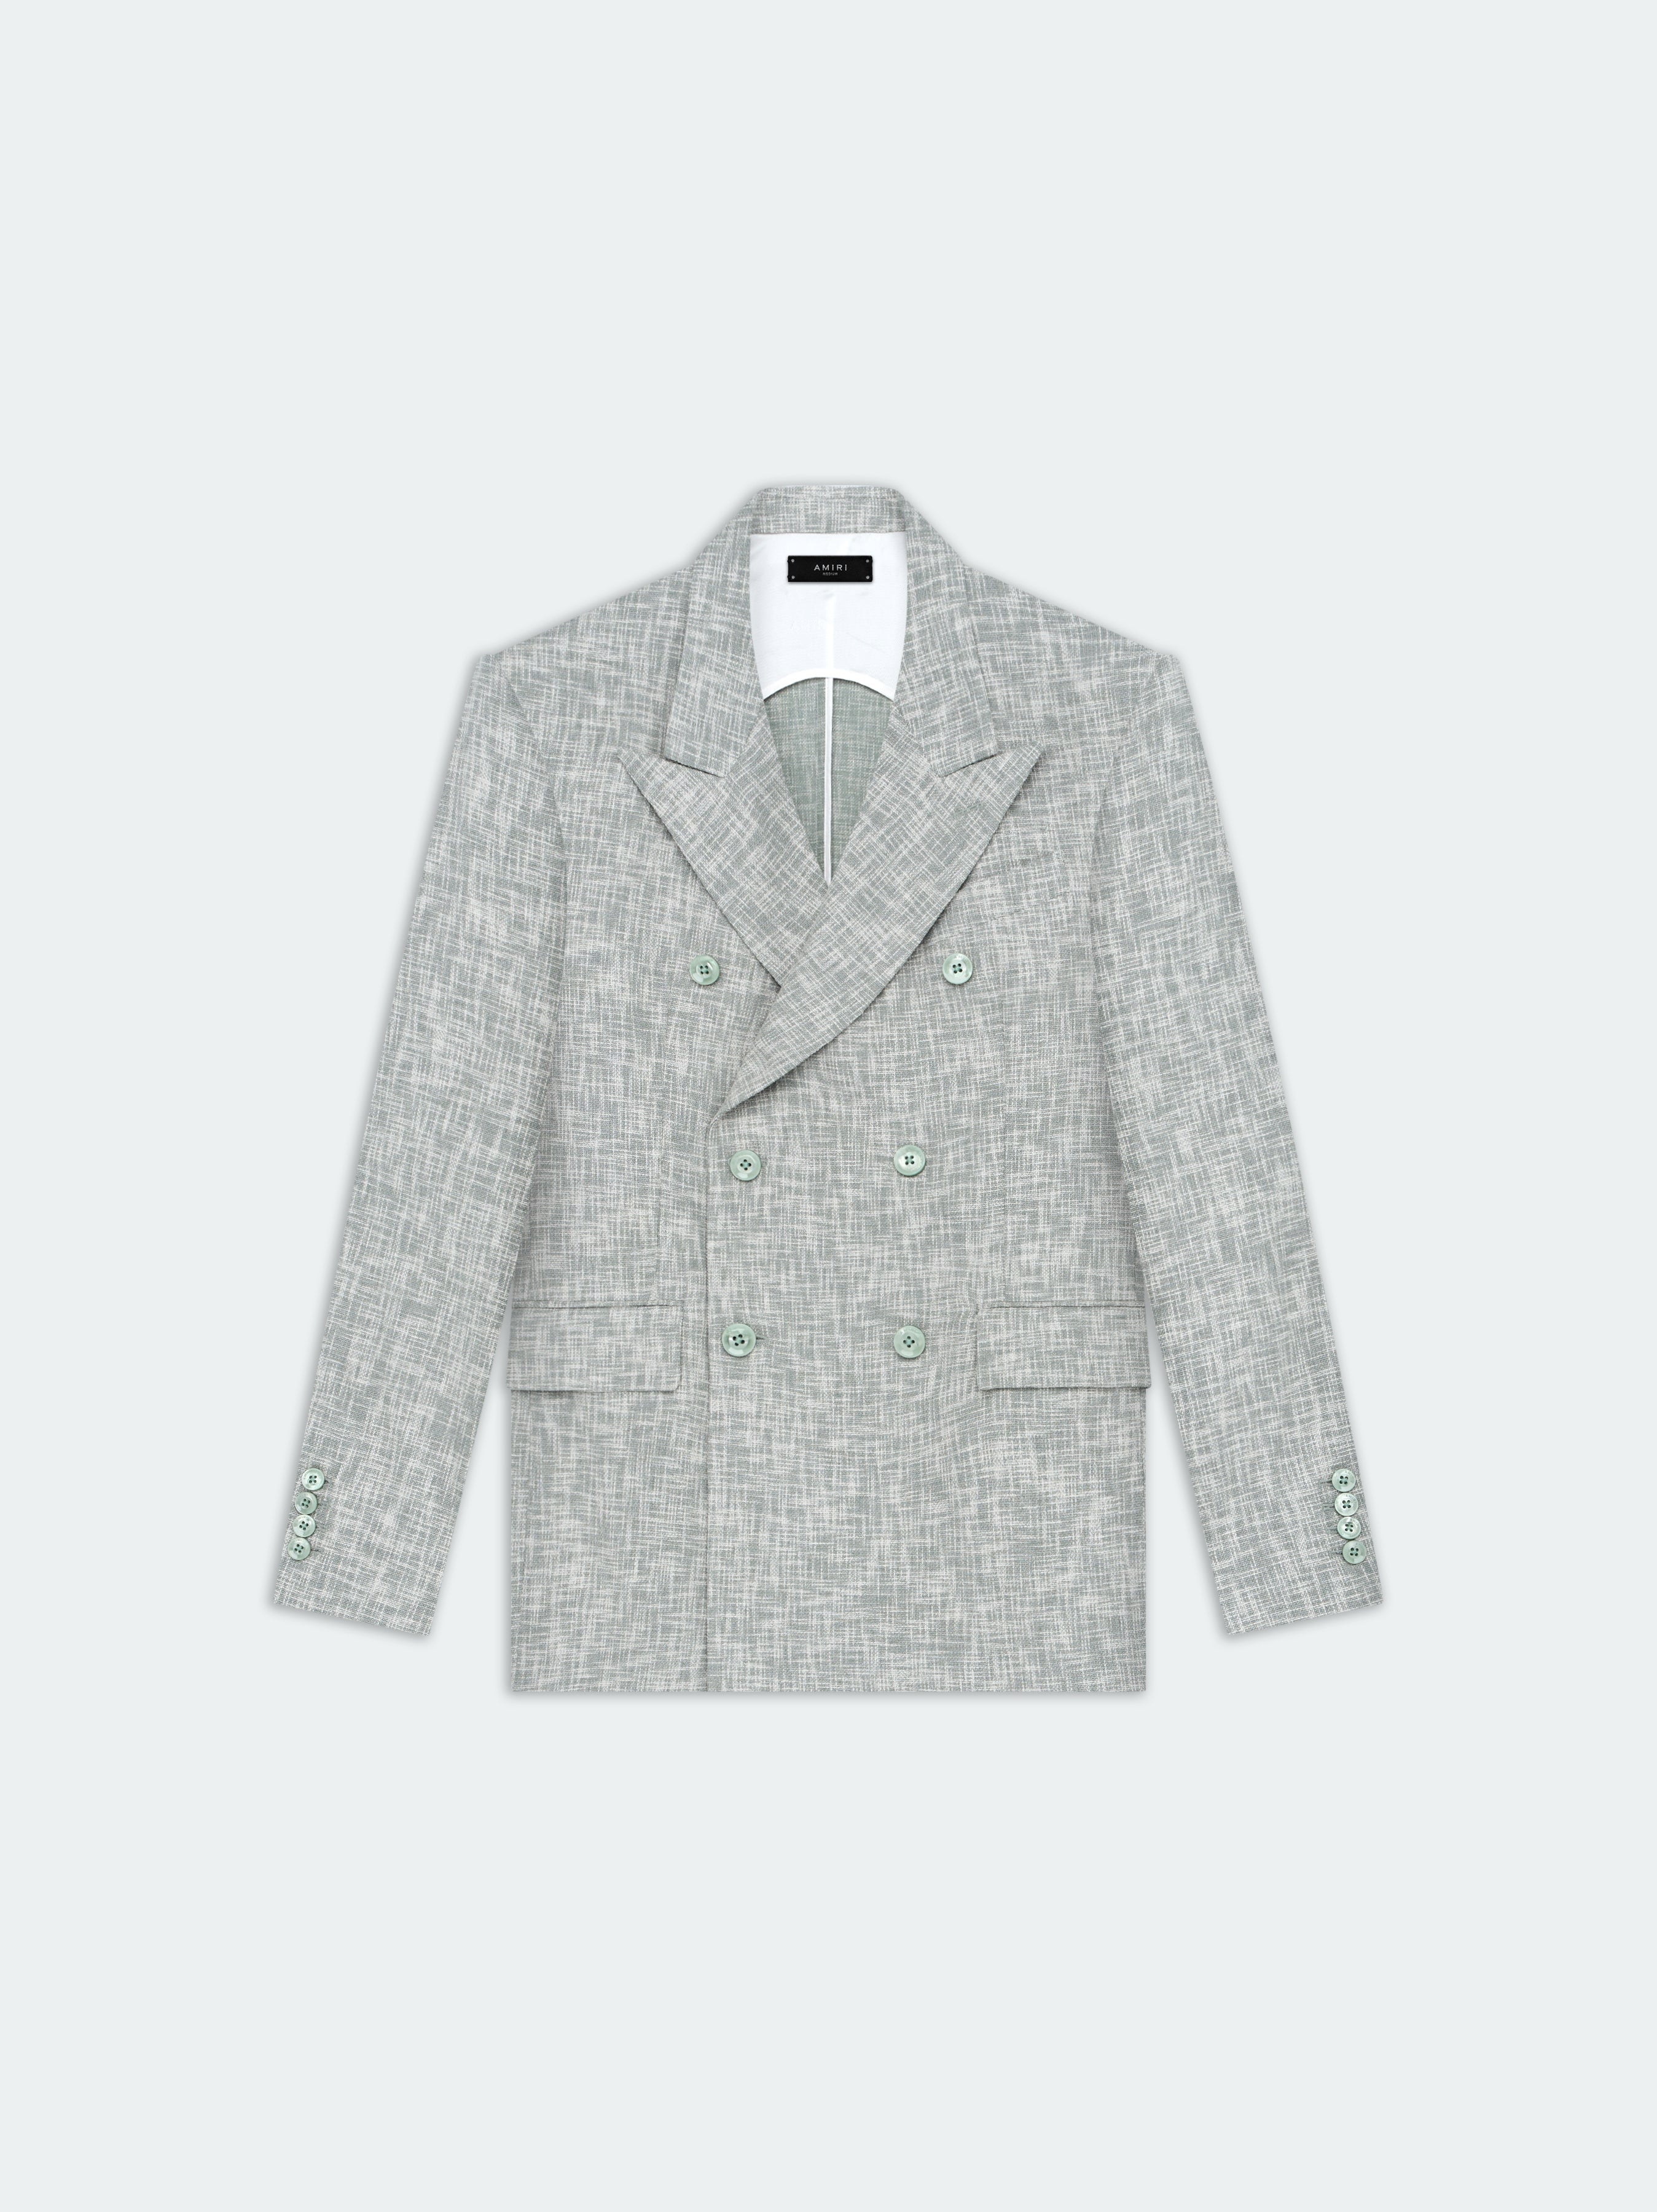 Product CROSSHATCH DOUBLE-BREASTED BLAZER - Seacrest featured image